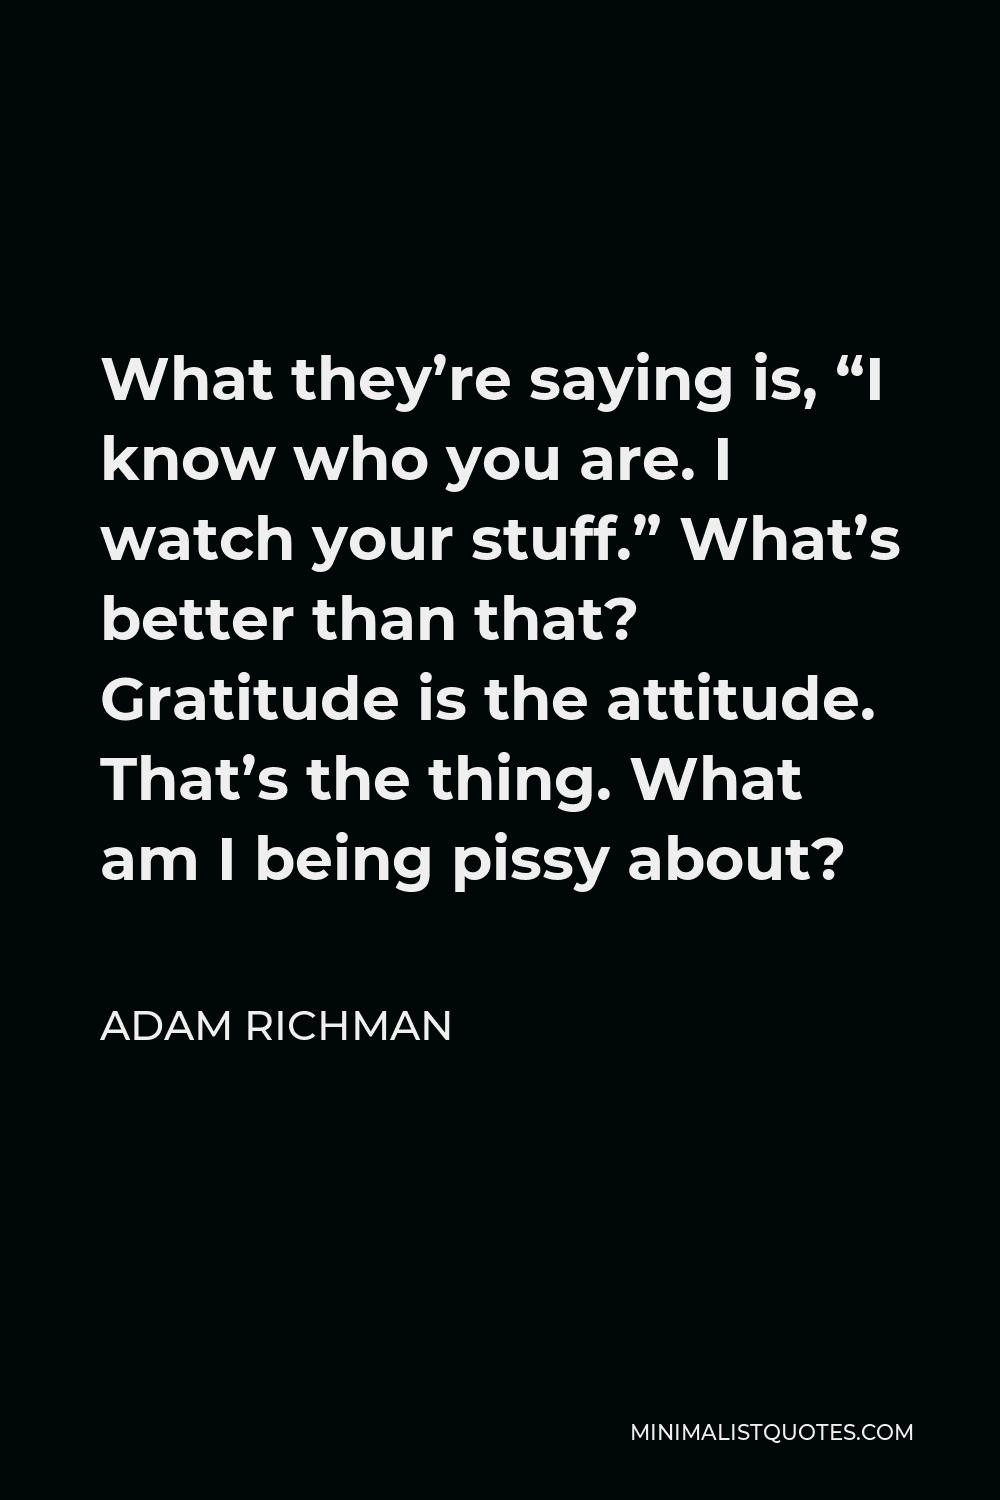 Adam Richman Quote - What they’re saying is, “I know who you are. I watch your stuff.” What’s better than that? Gratitude is the attitude. That’s the thing. What am I being pissy about?